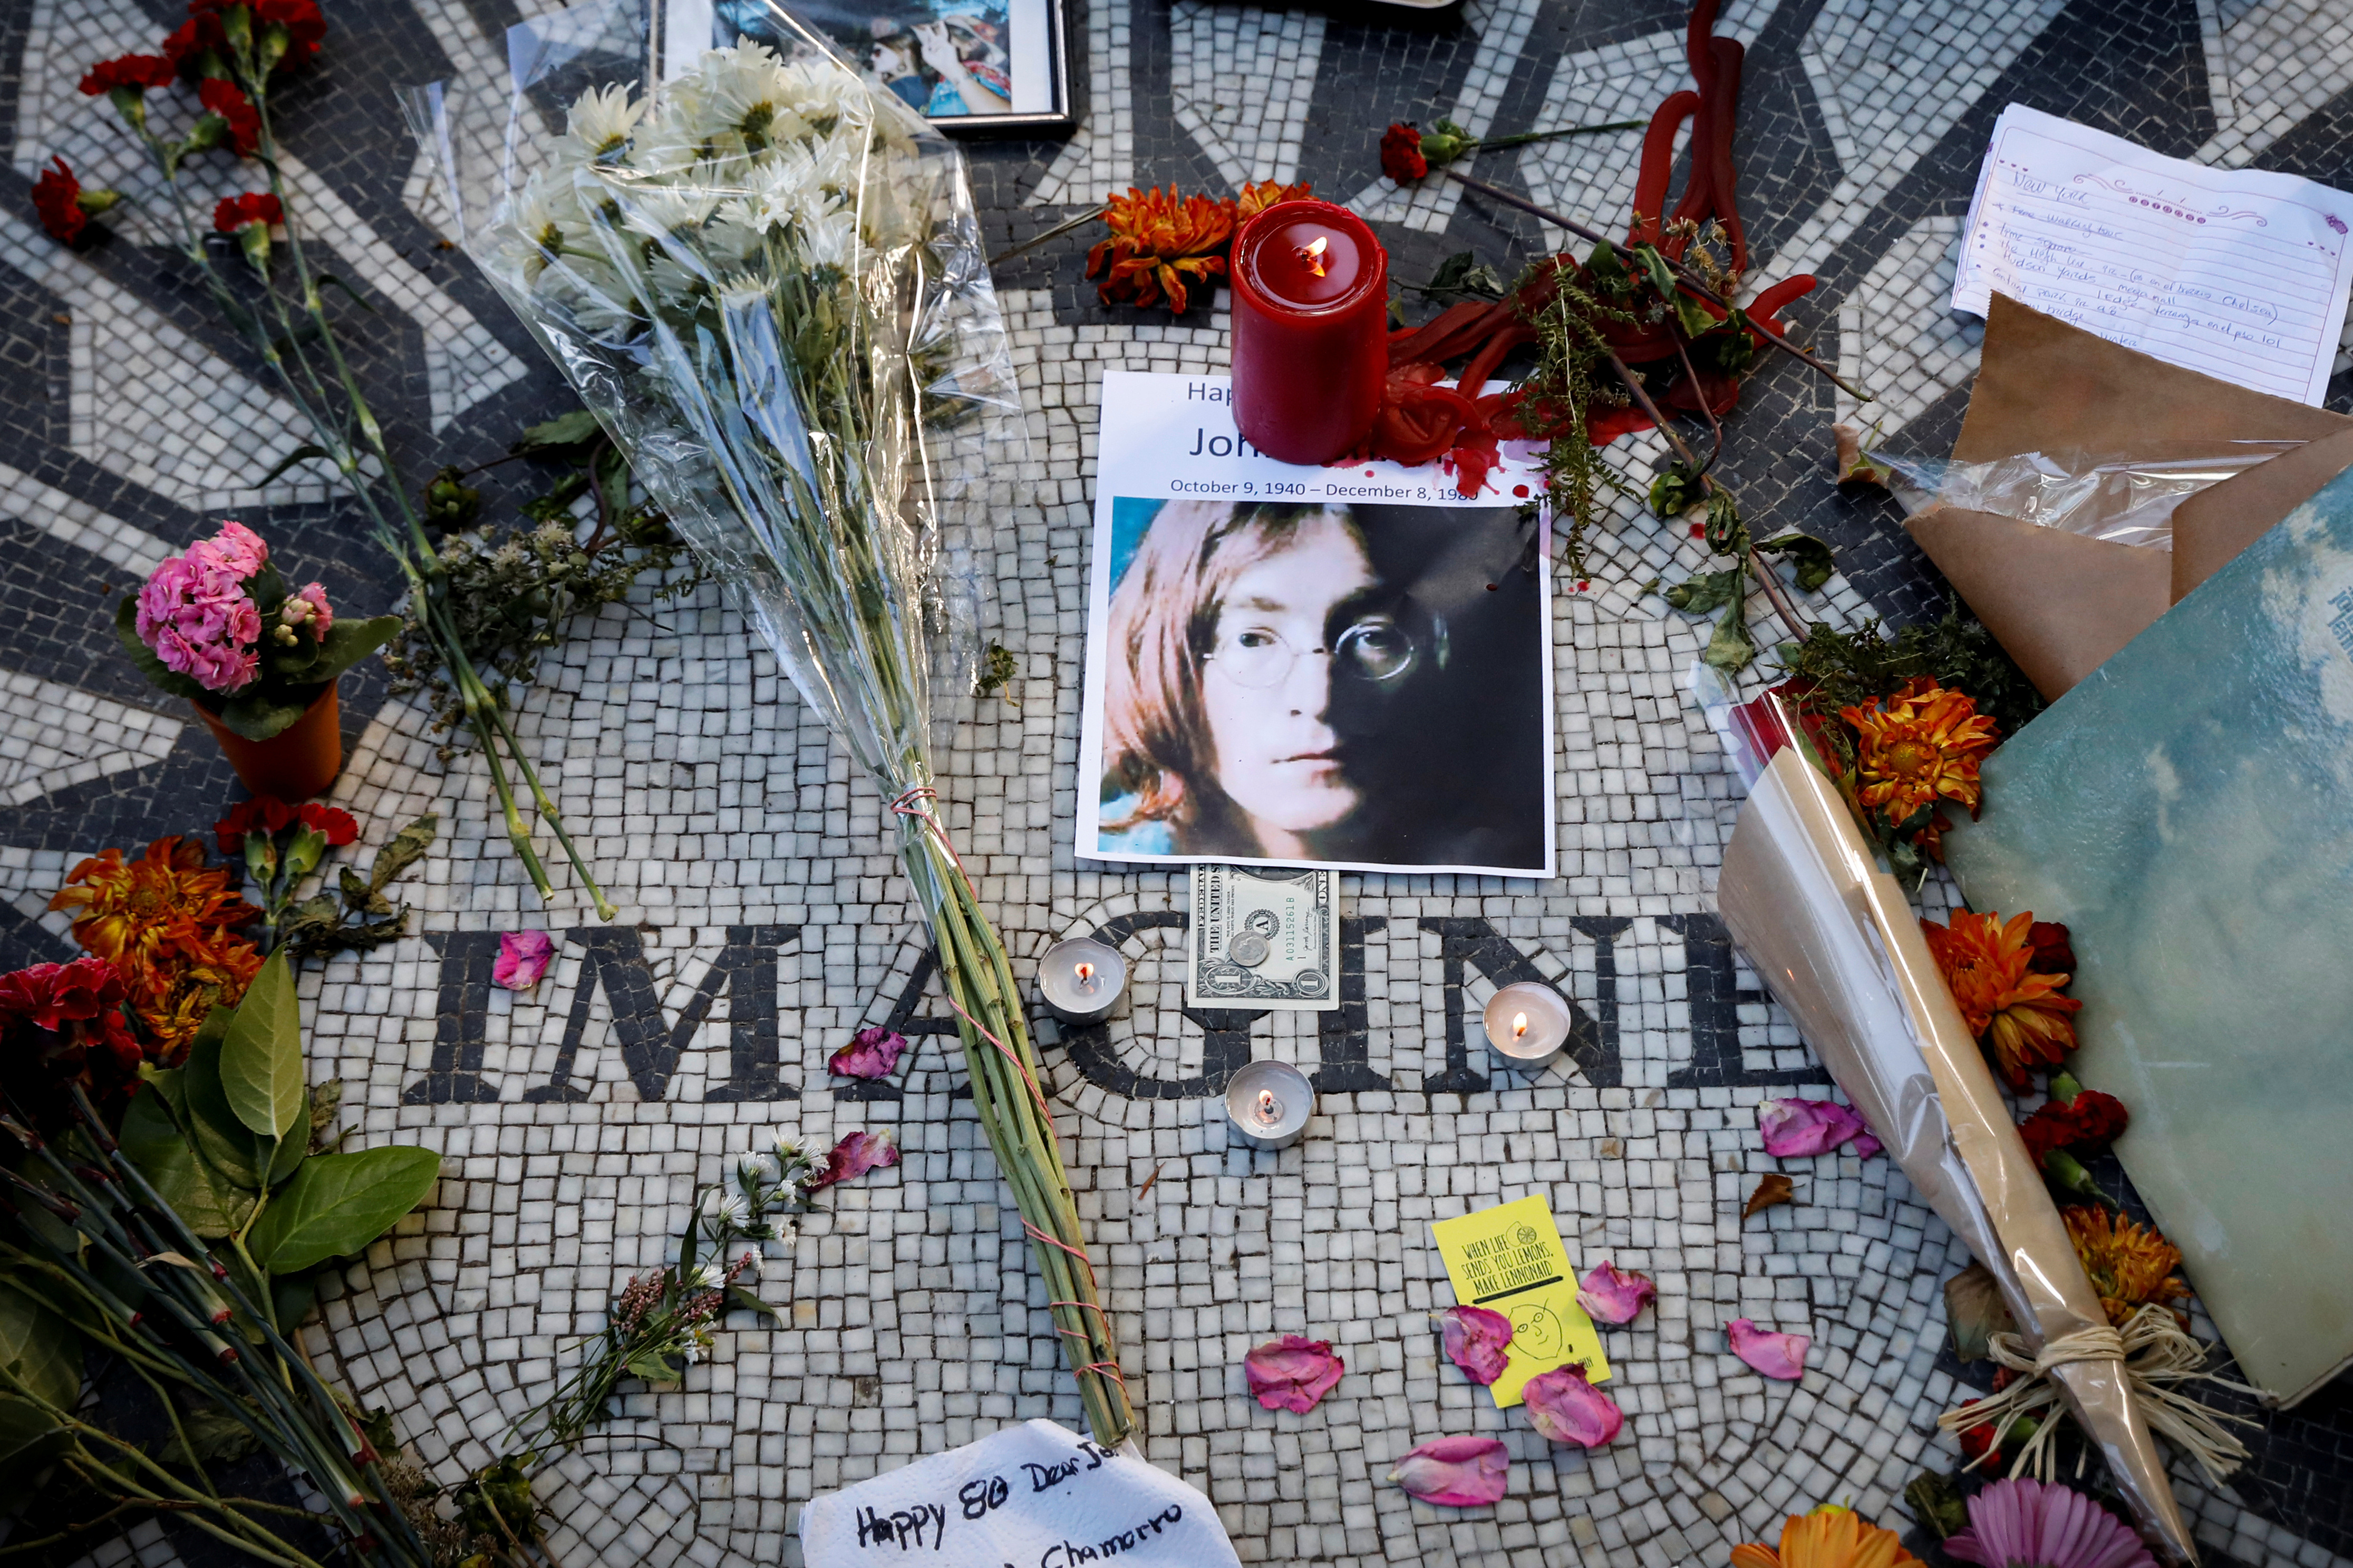 A memorial for late former Beatle John Lennon is seen at the 